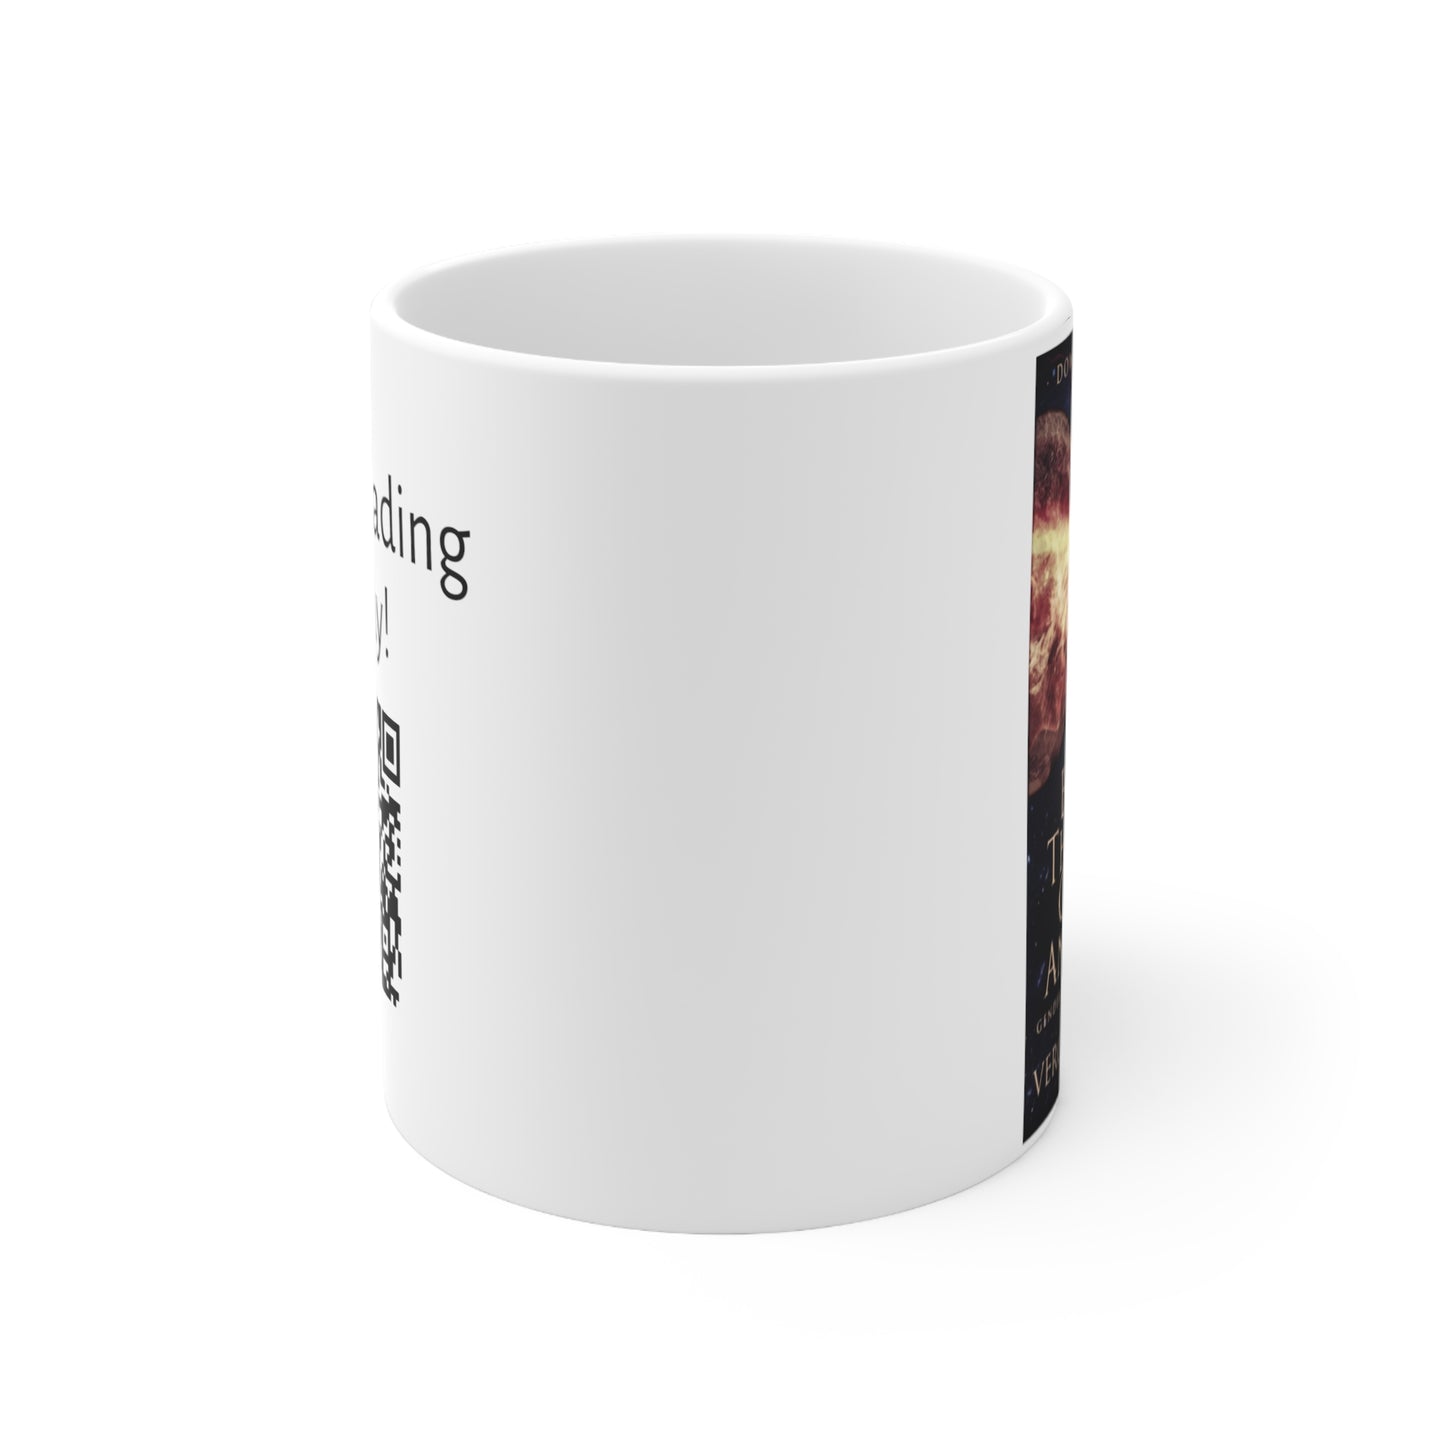 Busting The Myths Of Mars And Venus - Ceramic Coffee Cup